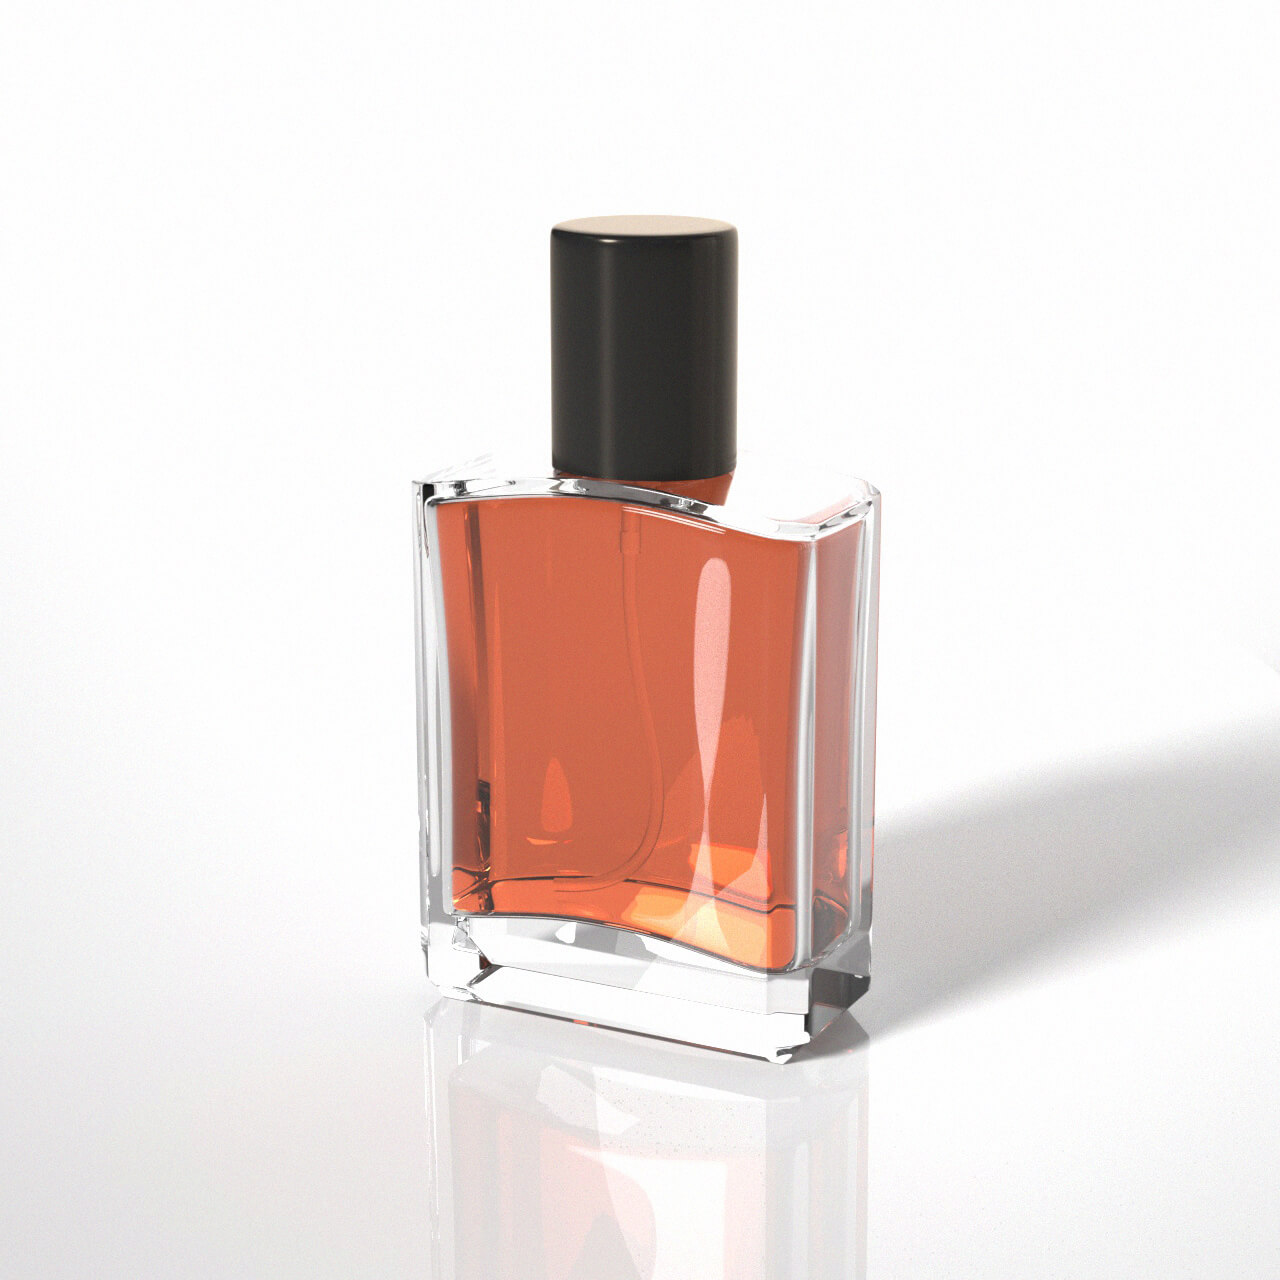 Curved perfume bottle (1)